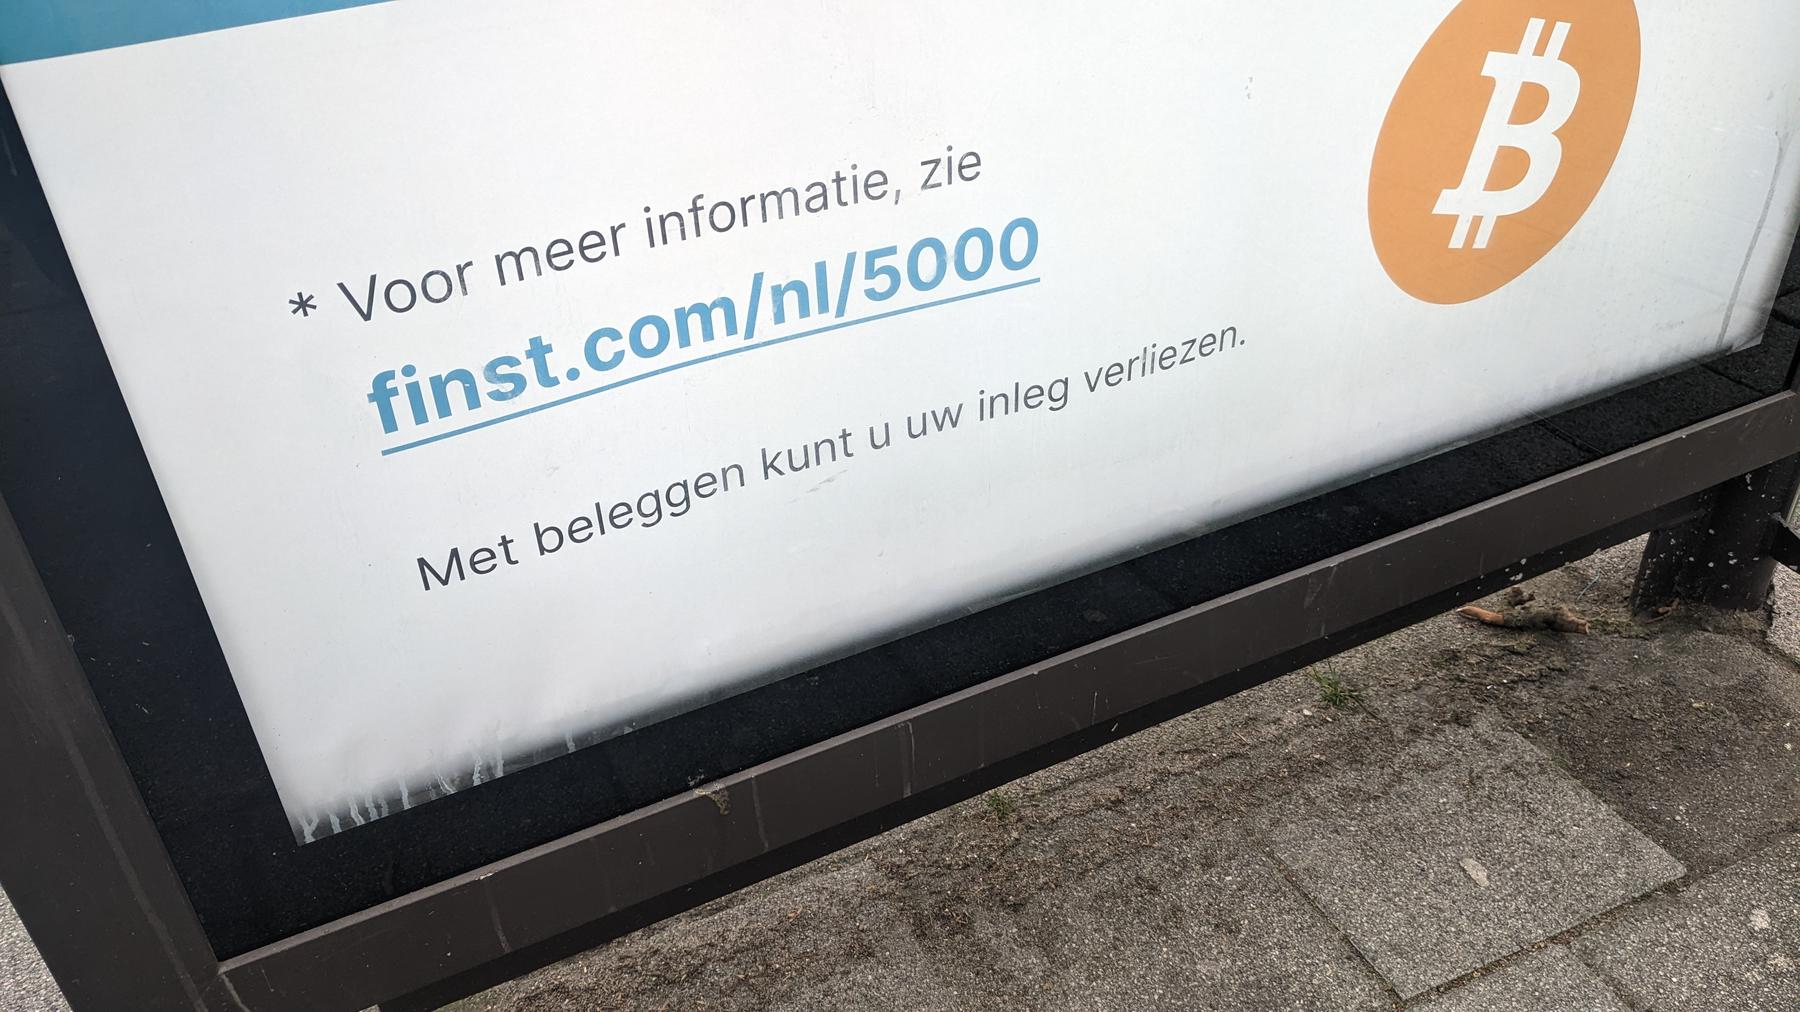 Finst cryptoplatform reclame, Molenlaankwartier, Rotterdam (2023) 02 - a sign that is on the side of